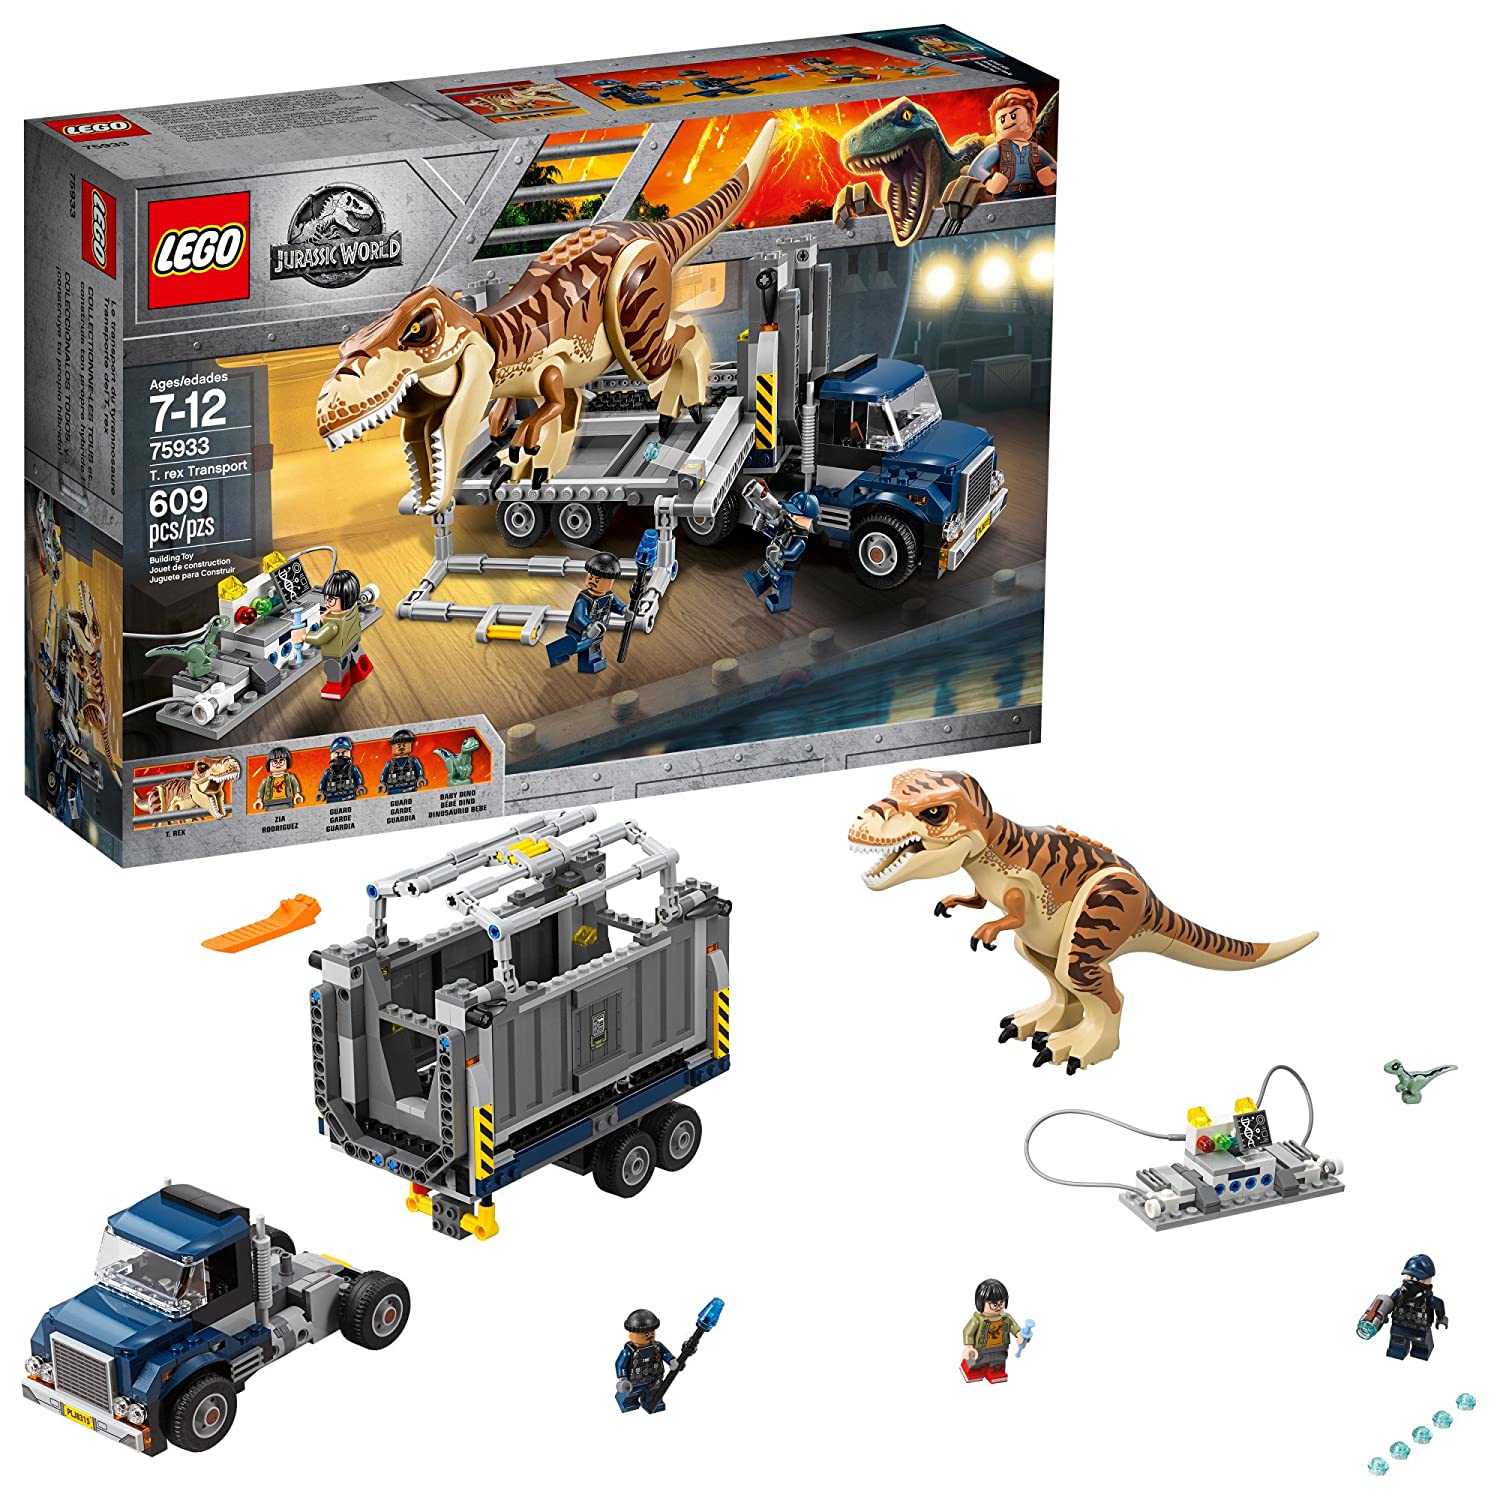 Top 9 Best Lego Jurassic Park Sets Reviews in 2023 1